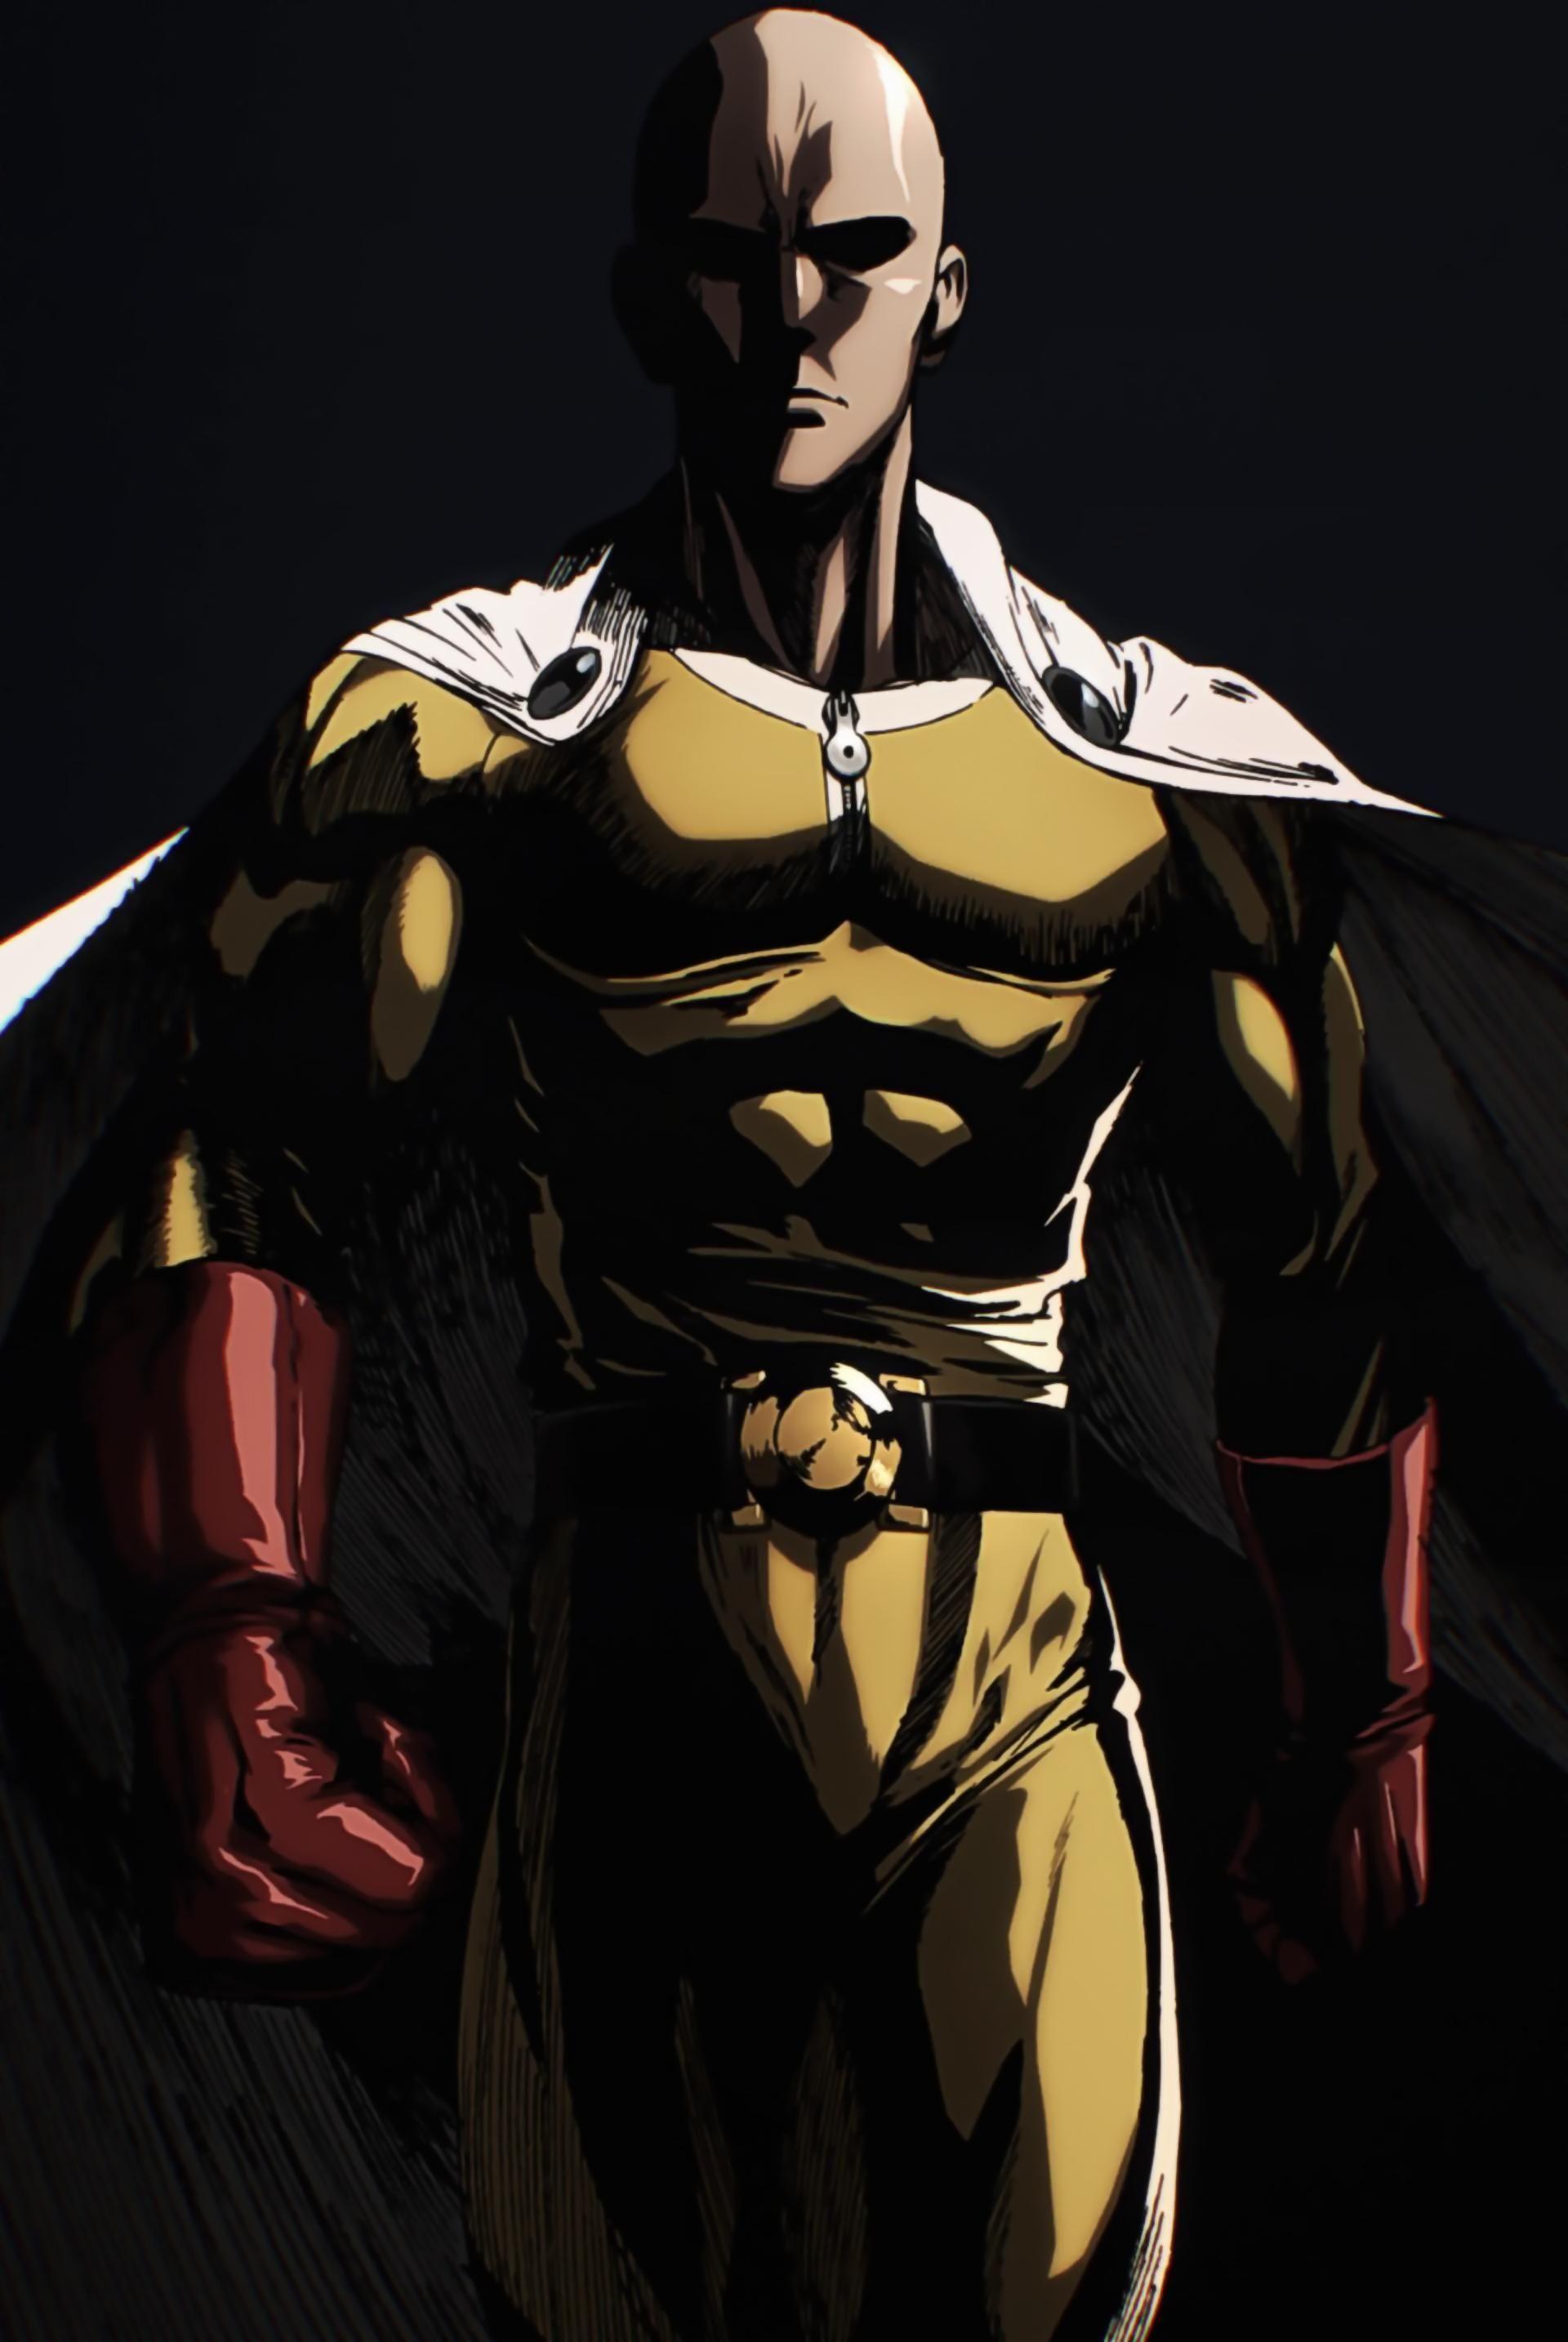 Free One Punch Man Wallpaper Downloads 100 One Punch Man Wallpapers for  FREE  Wallpaperscom